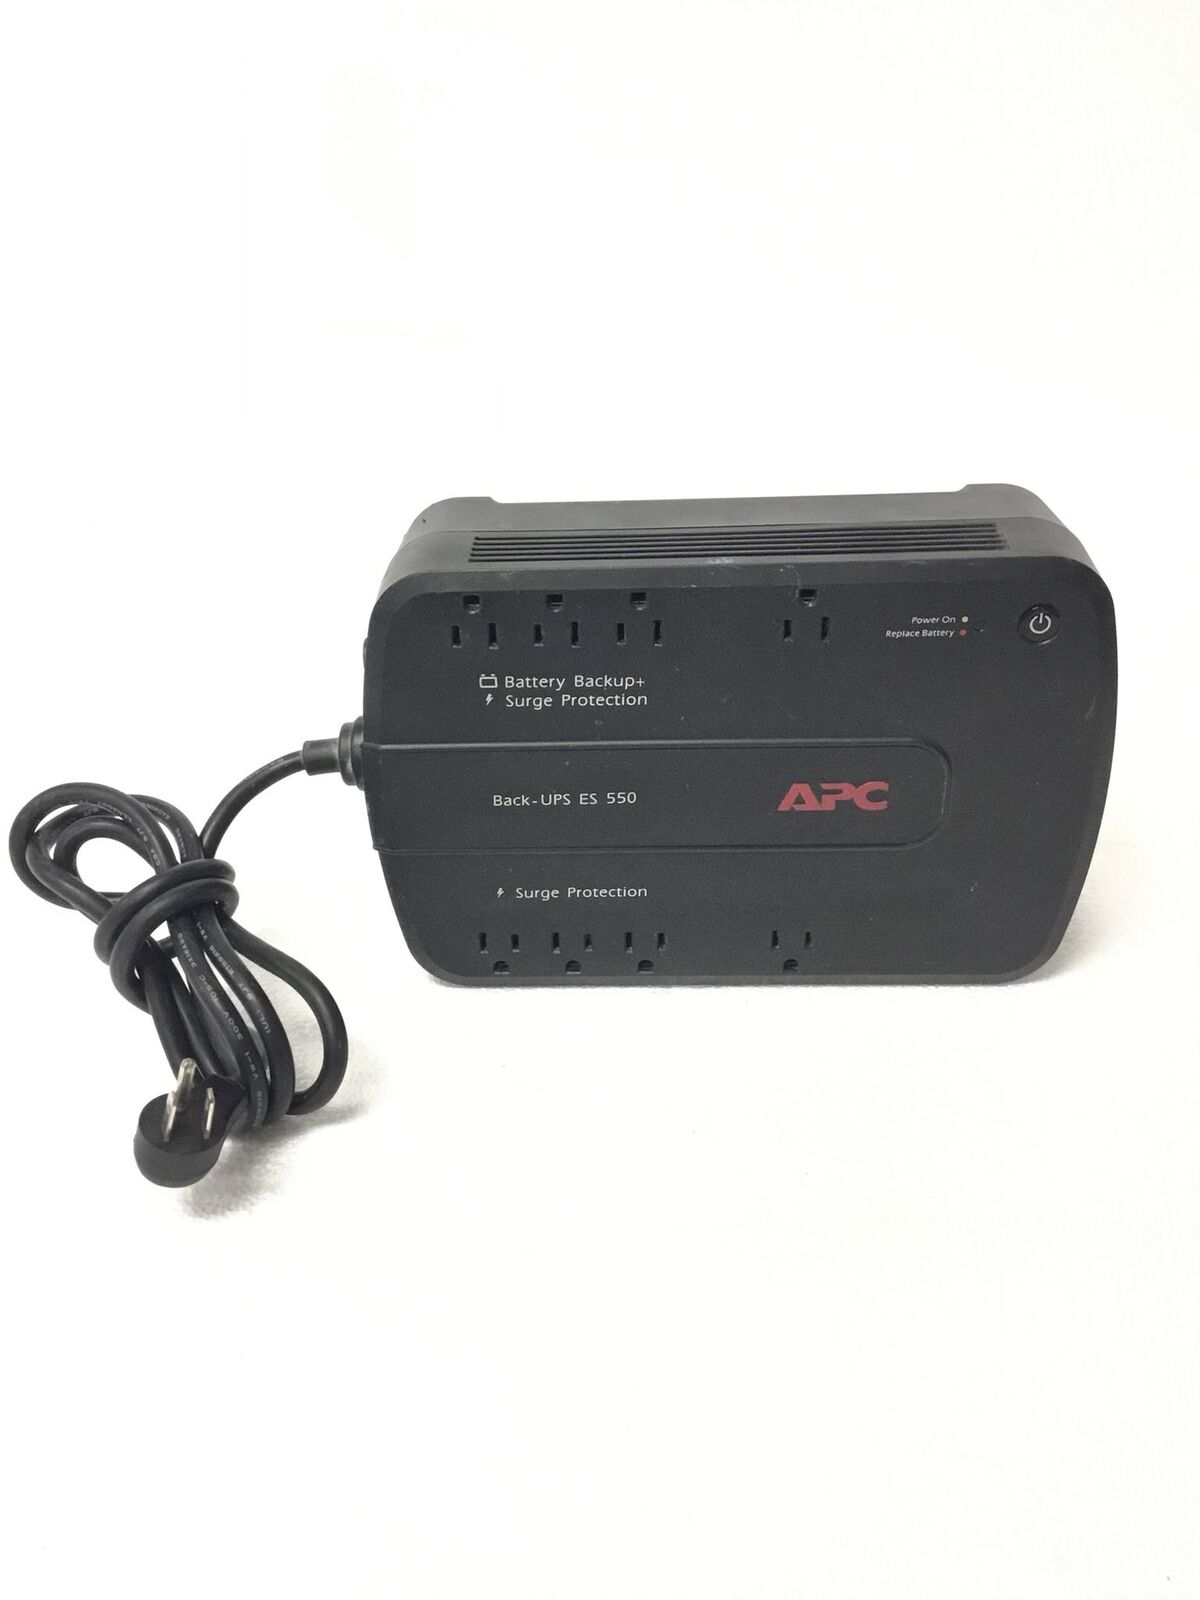 APC Back-UPS ES 550 BE550G 8 Outlets UPS w/Cables,No Battery,WORKING,FREE SHIP